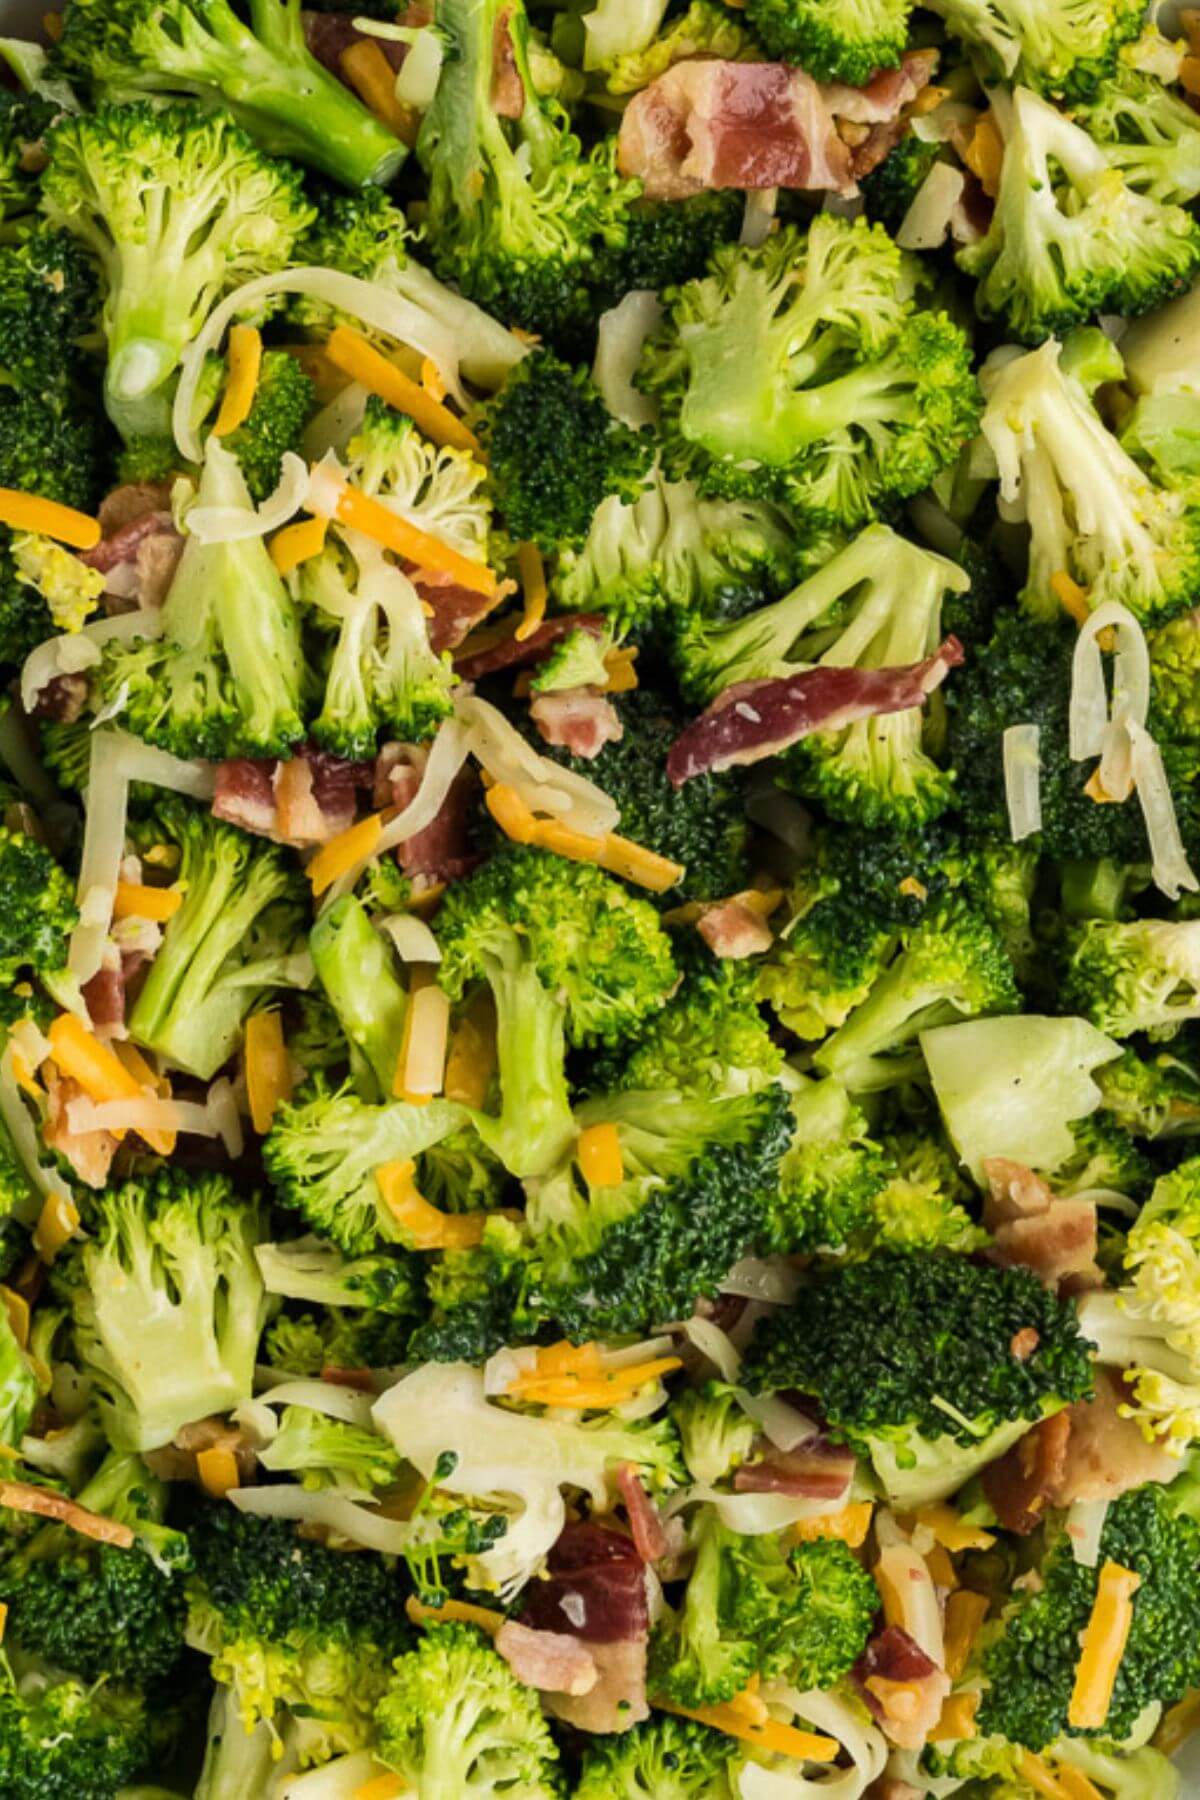 Bite sized florets of broccoli, grated white and yellow cheese, and hunks of bacon are shown up close for texture.